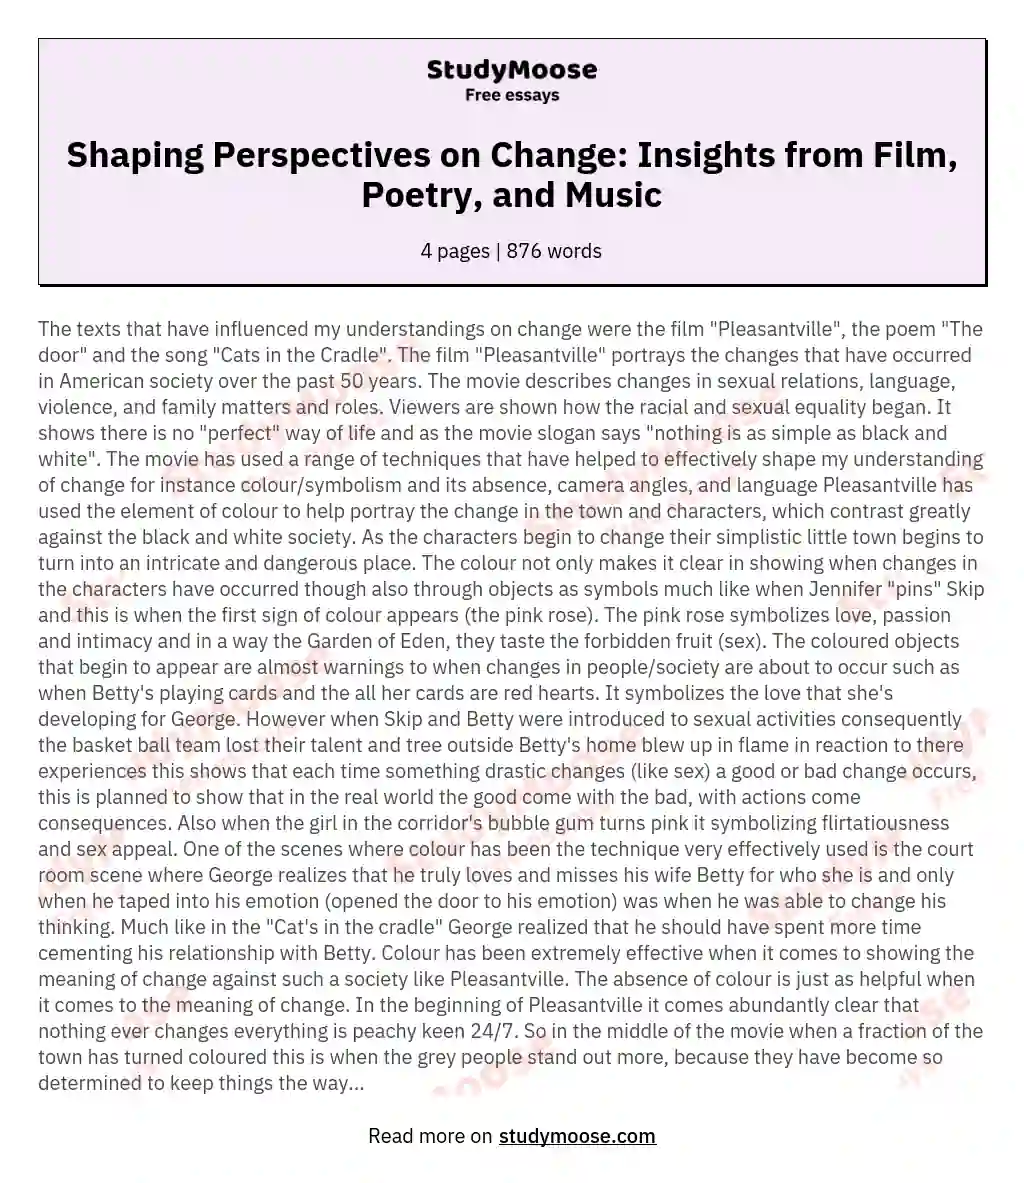 Shaping Perspectives on Change: Insights from Film, Poetry, and Music essay